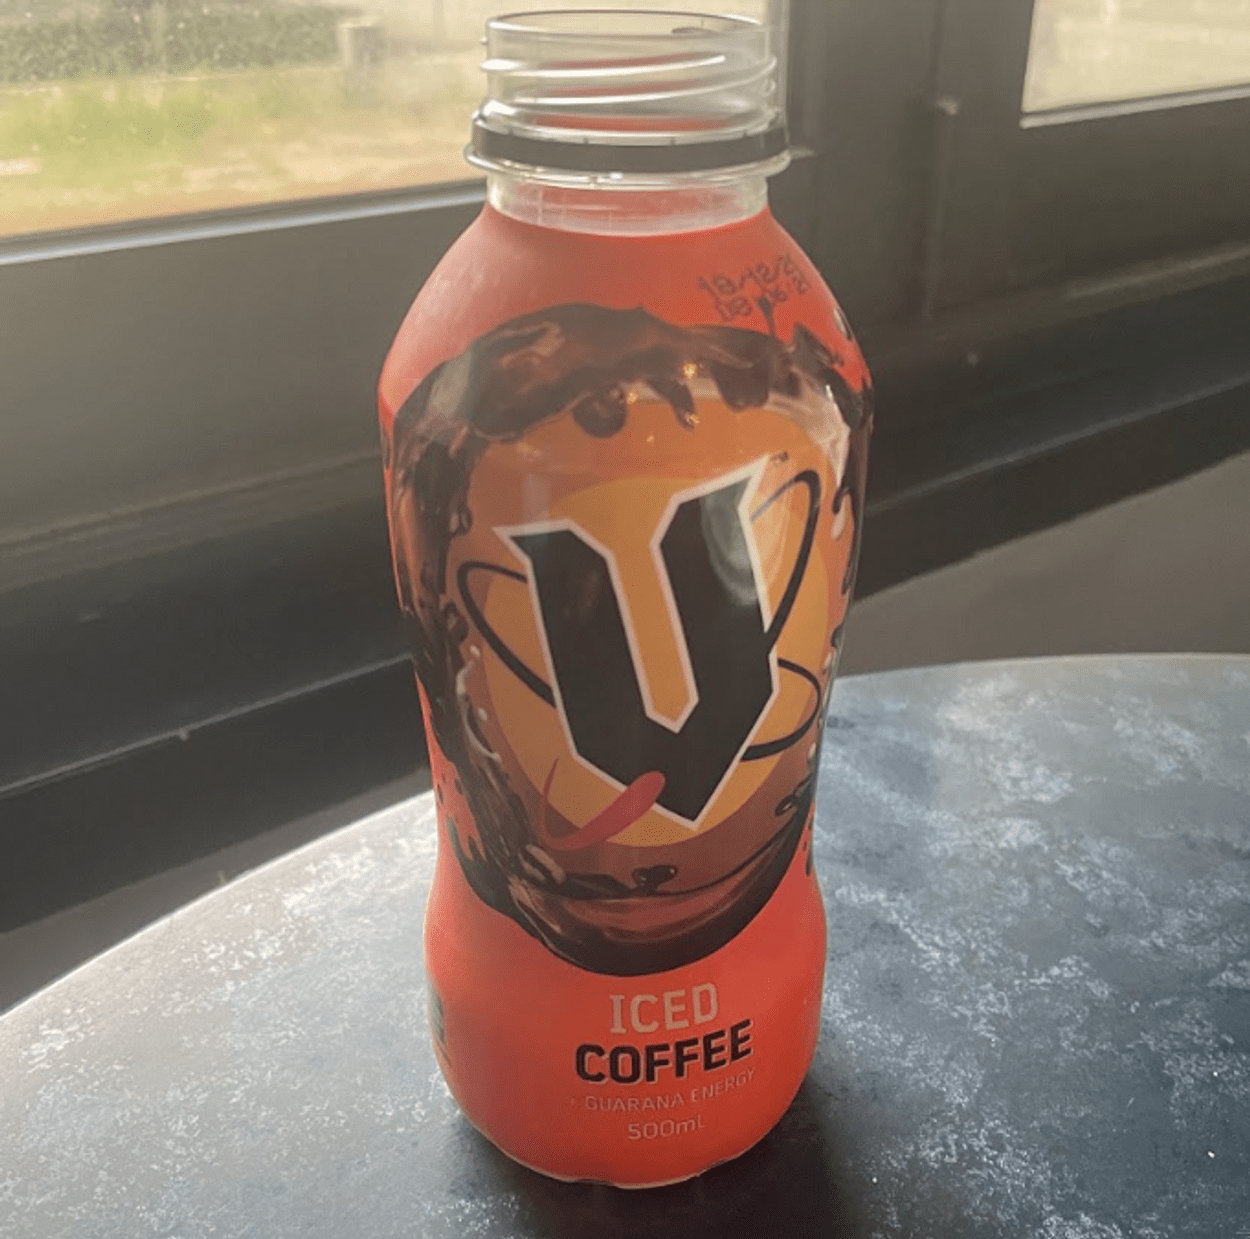 V Iced Coffee Review (Facts)